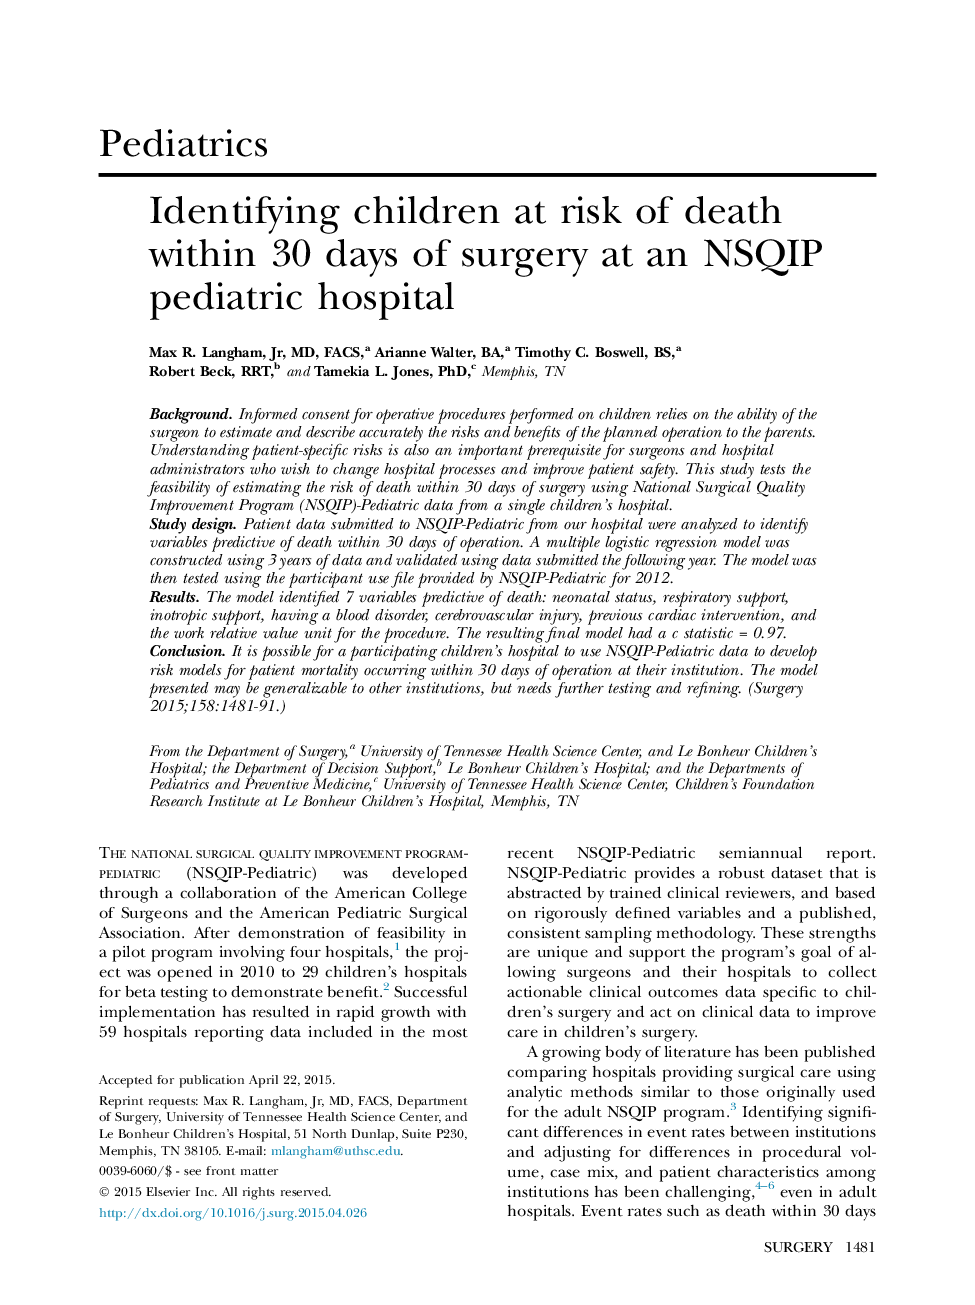 Identifying children at risk of death within 30 days of surgery at an NSQIP pediatric hospital